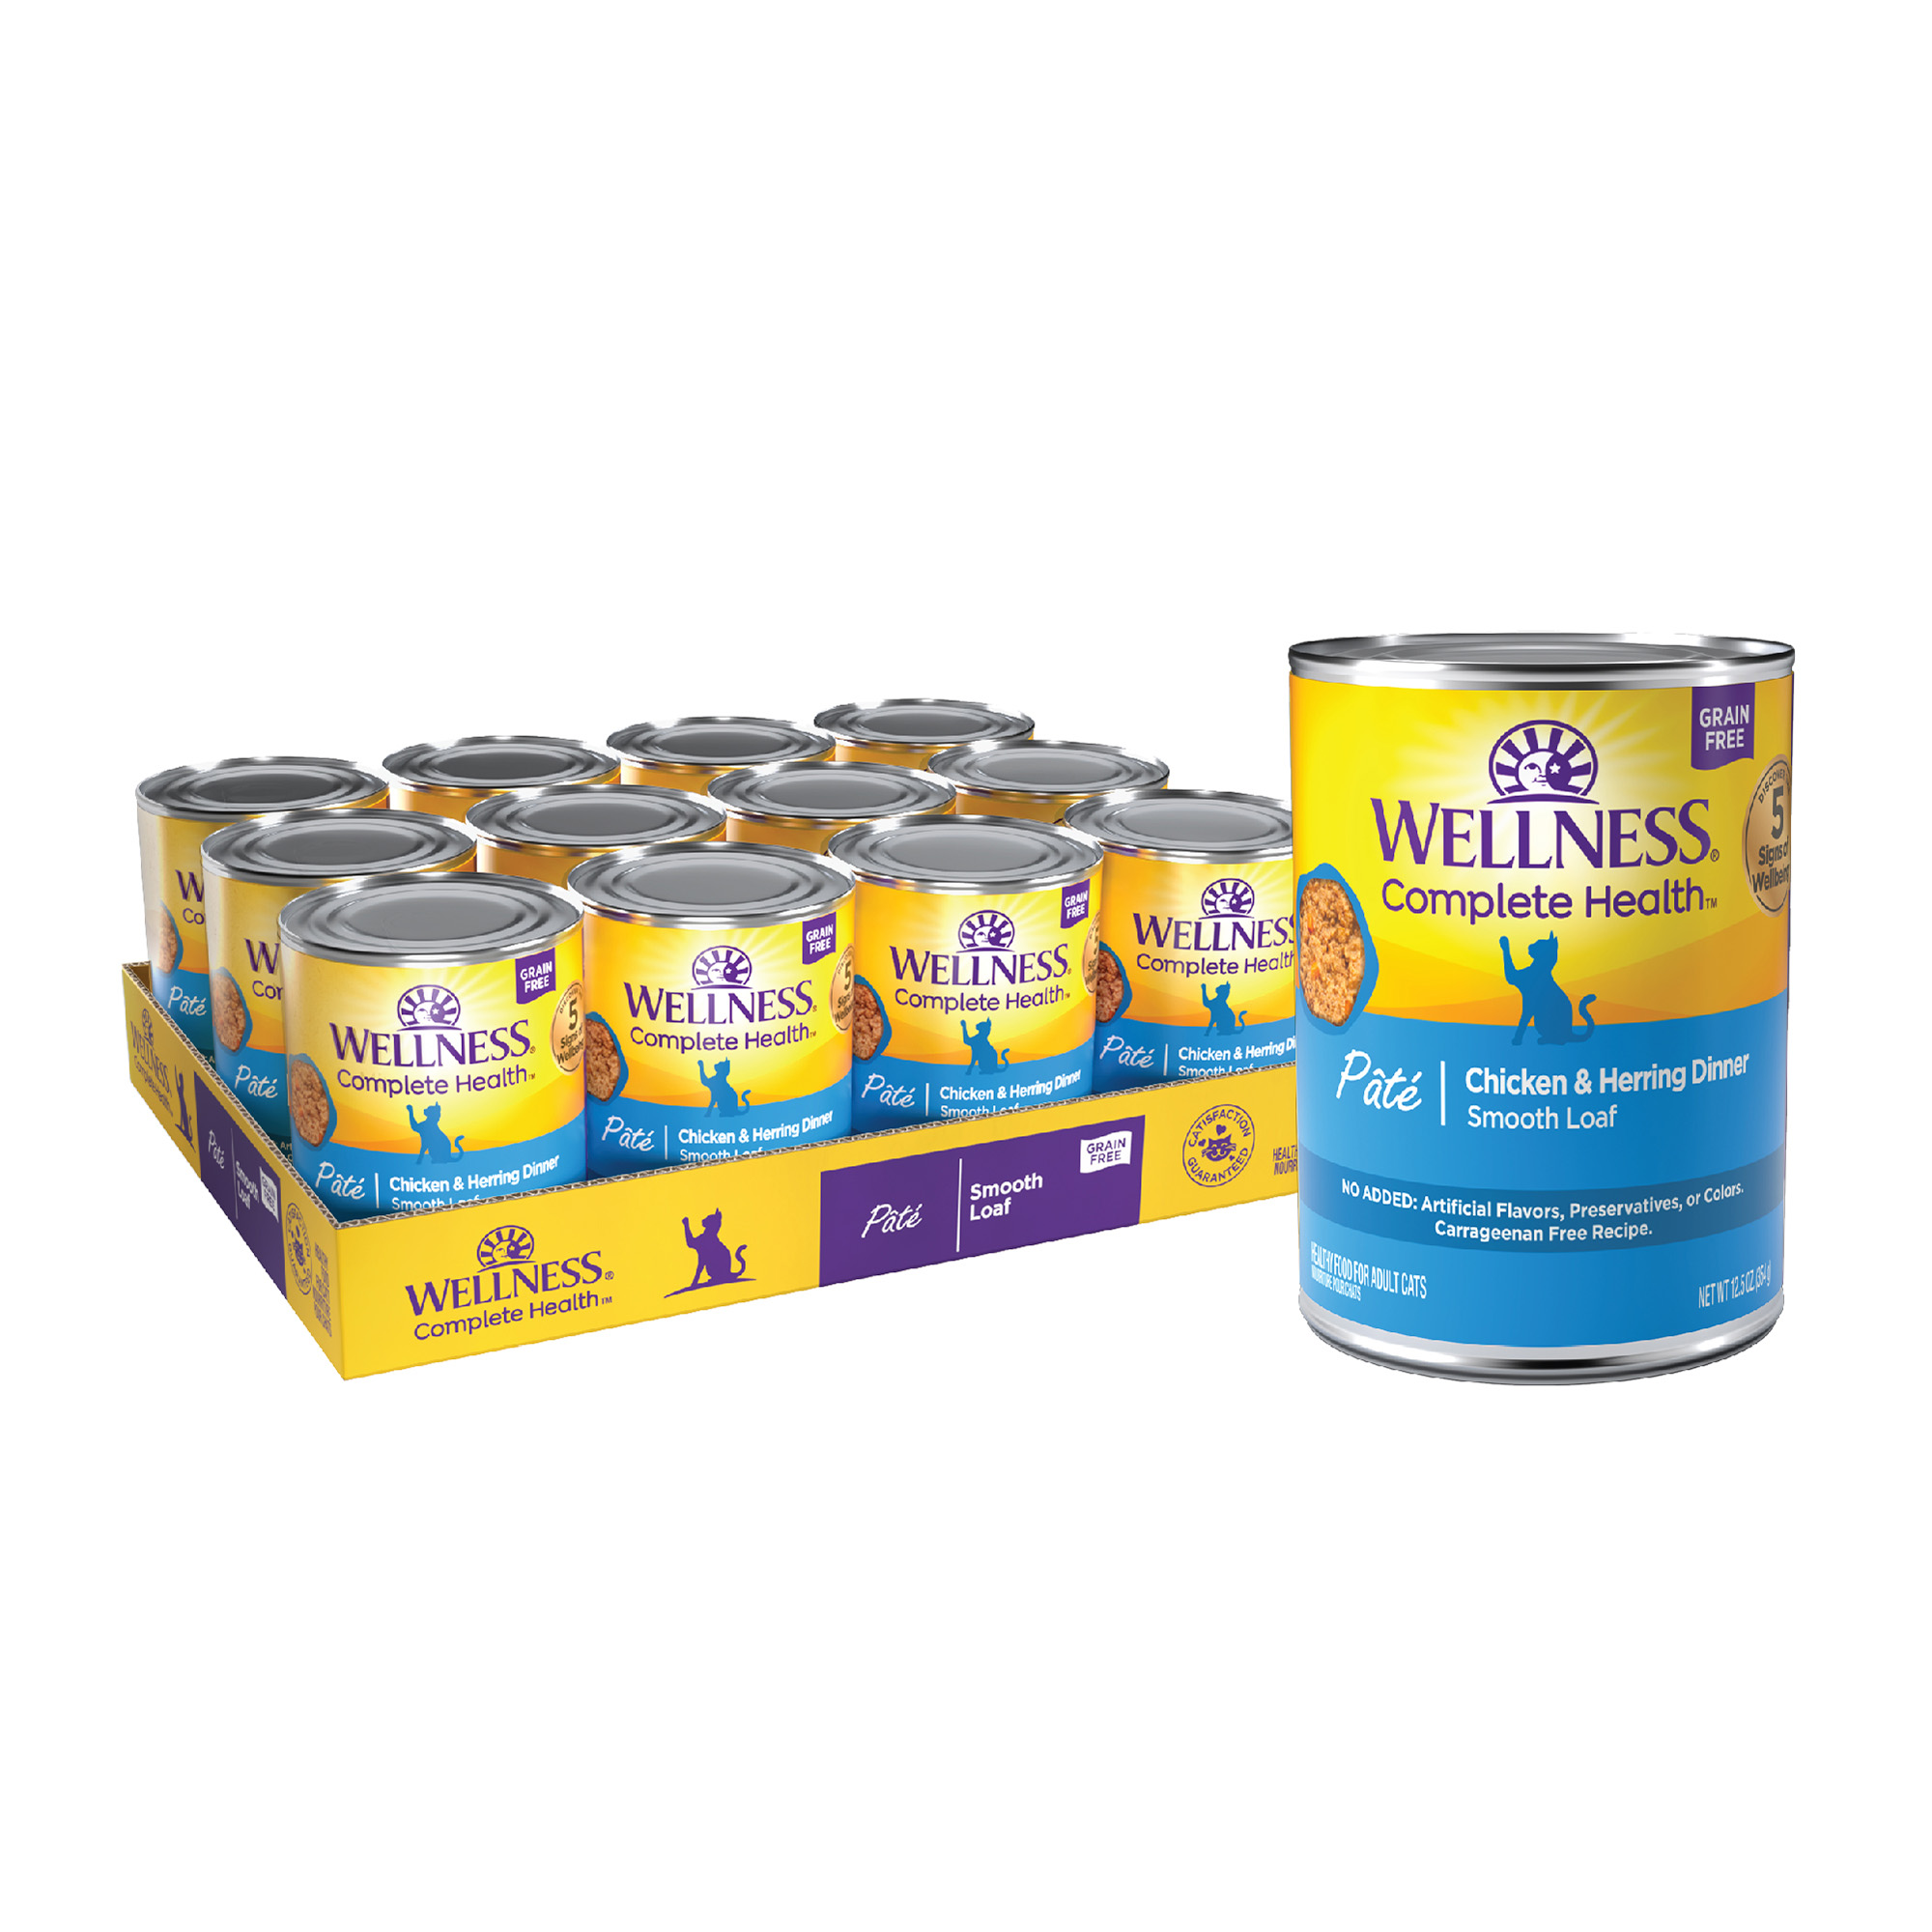 Wellness Complete Health Grain Free Canned Cat Food, Chicken & Herring Dinner Pate, 12.5 Ounces (Pack of 12) - image 1 of 9